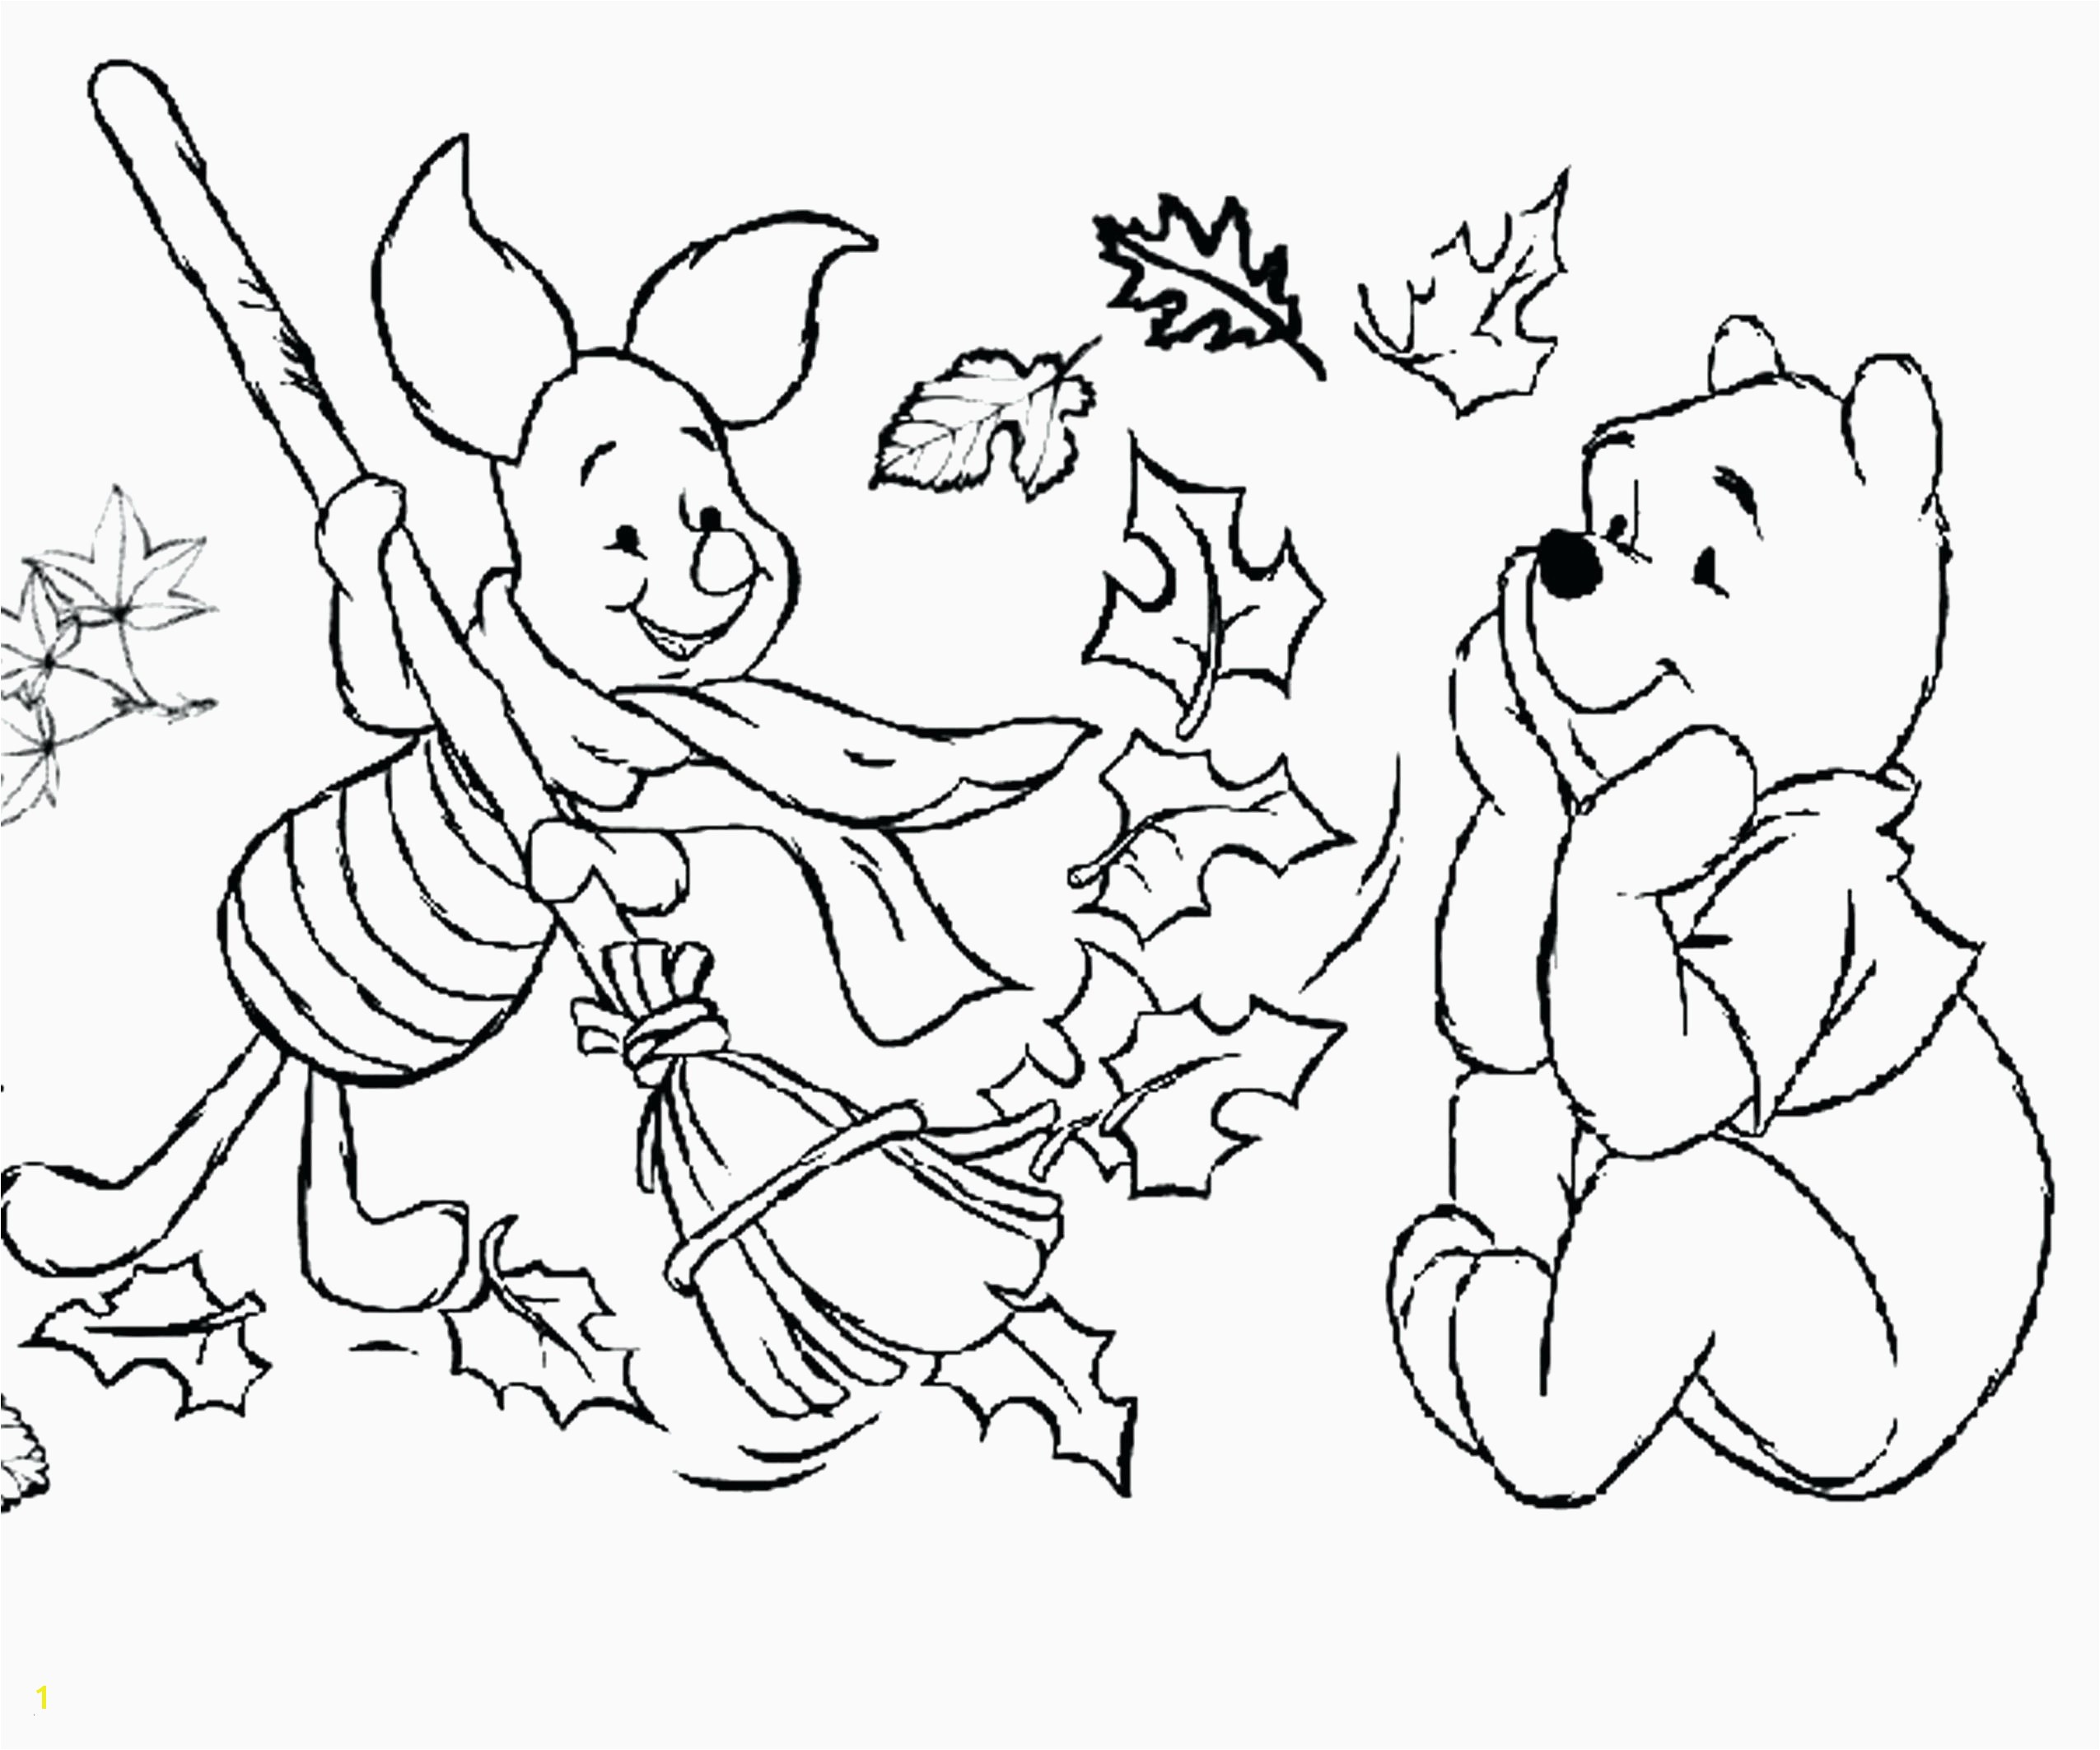 Popcorn Coloring Pages for Kids 14 Inspirational Popcorn Coloring Pages for Kids